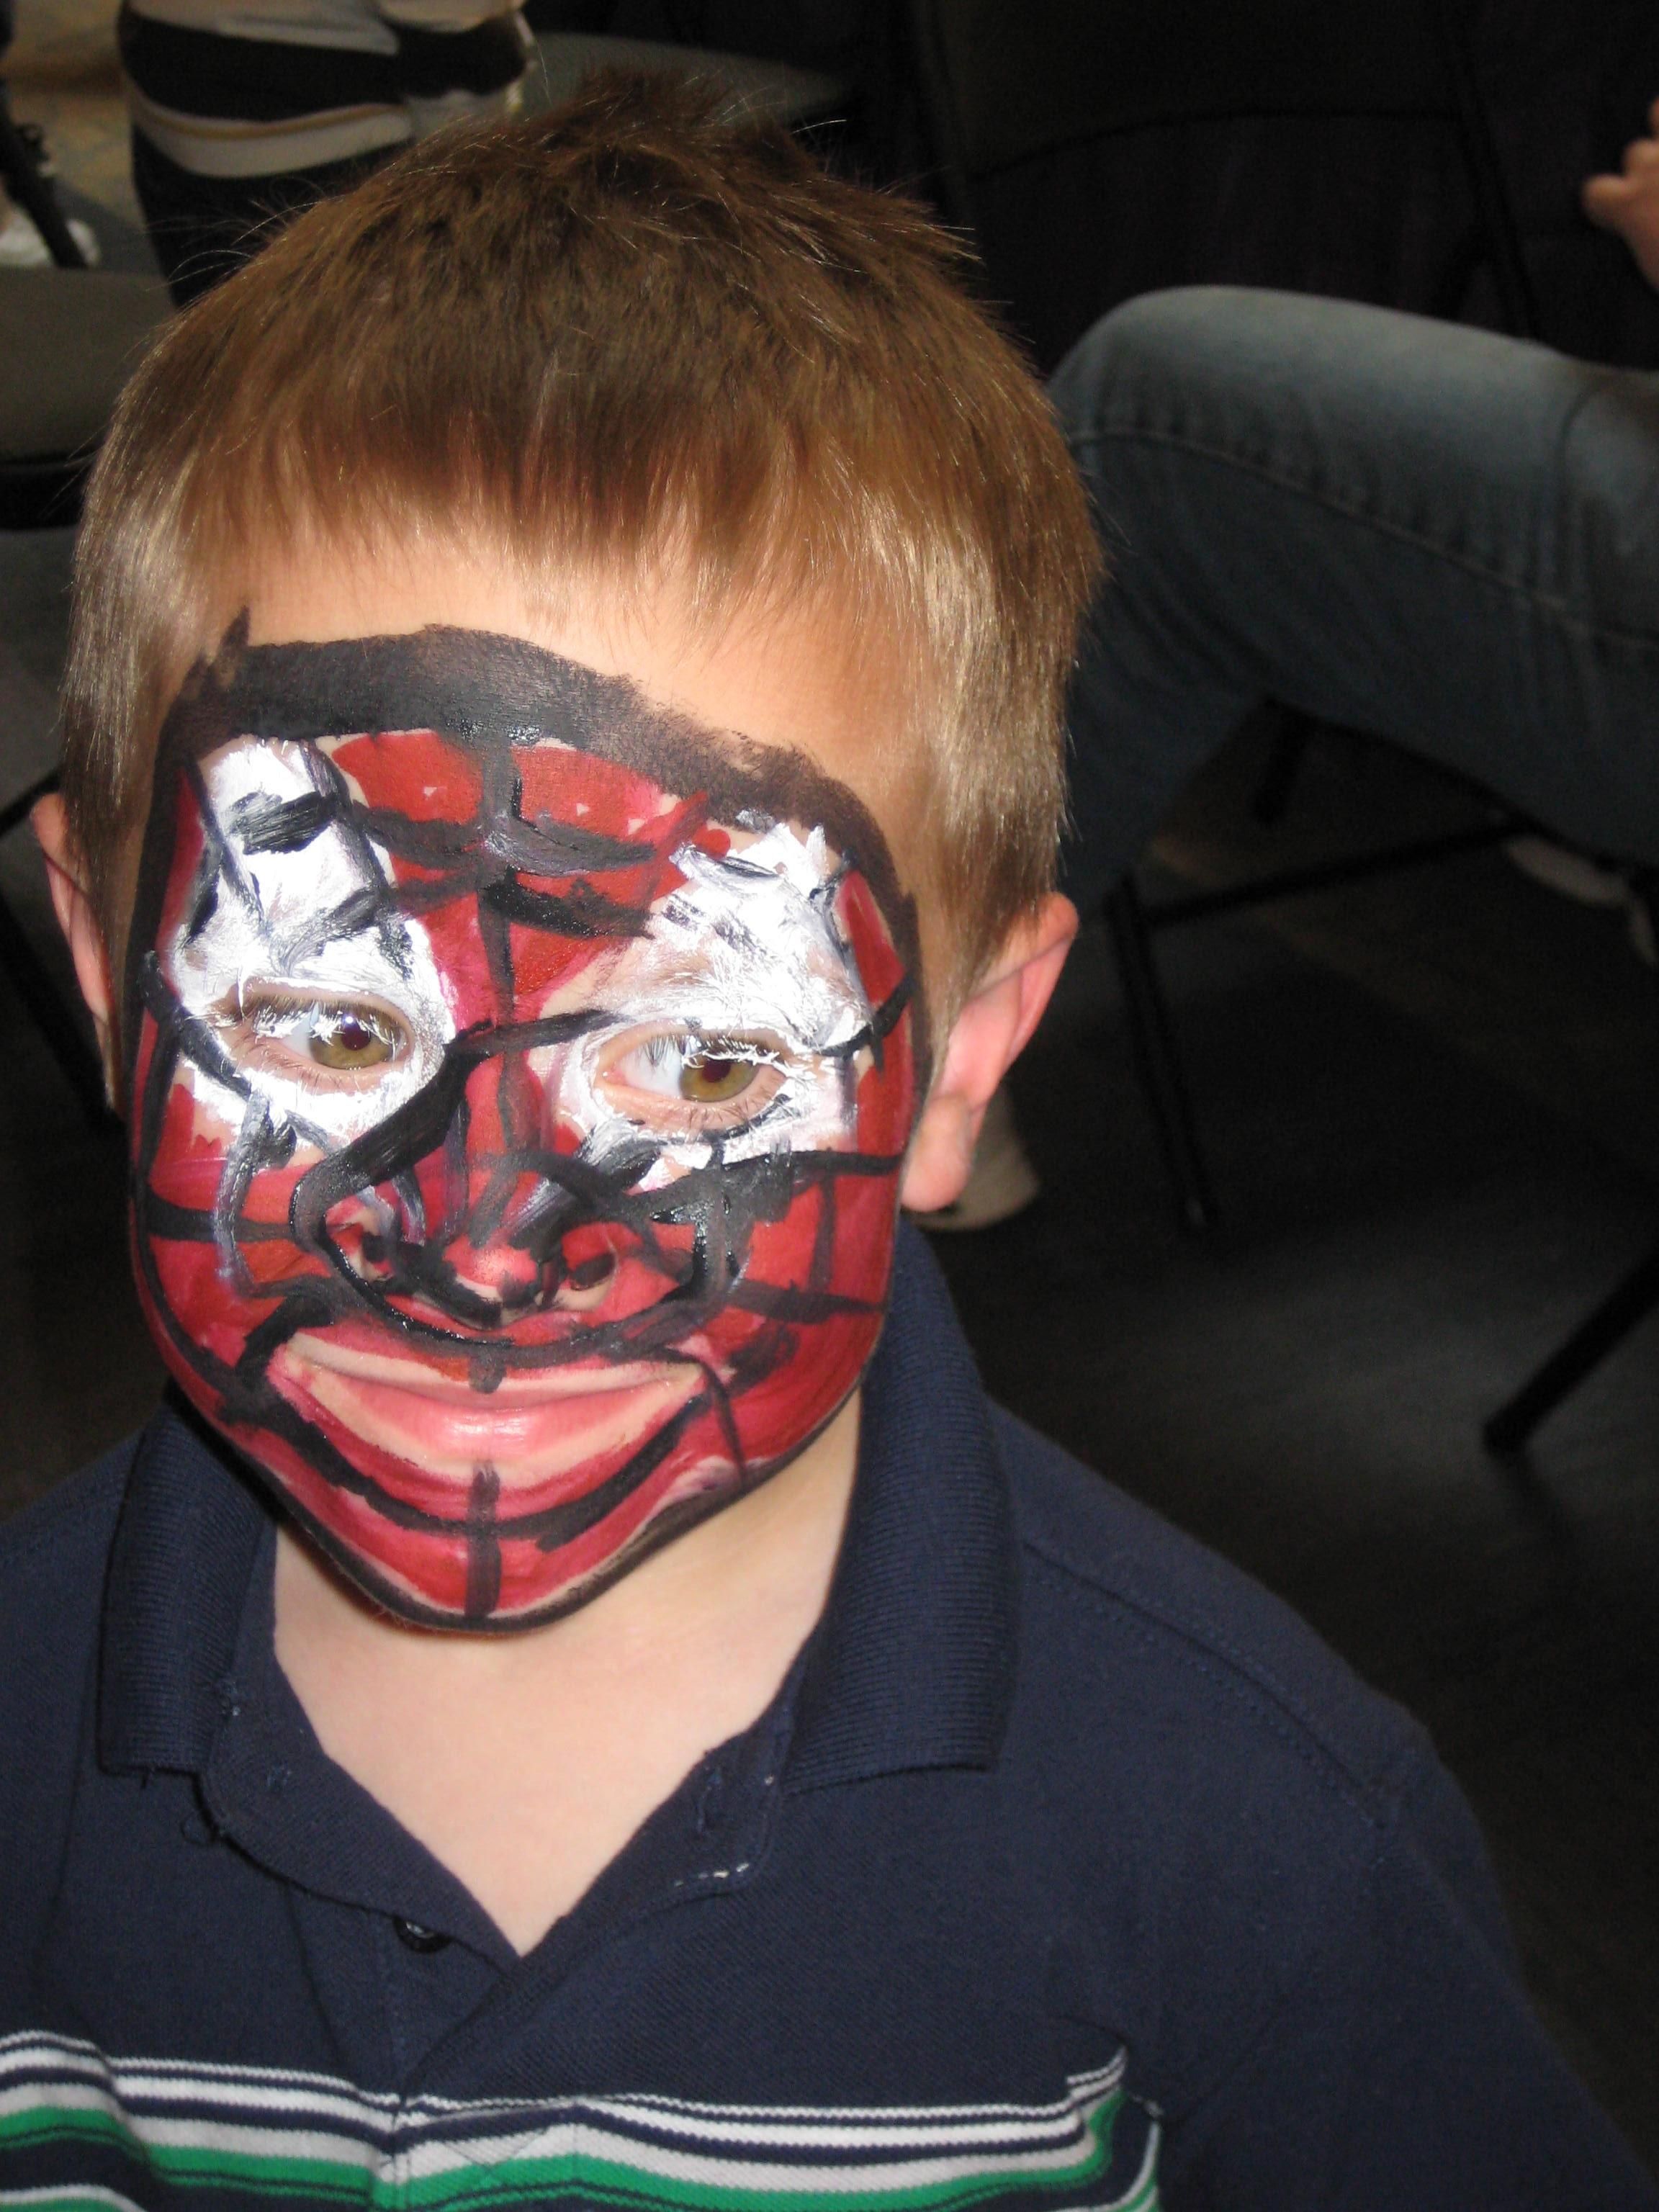 At a children's fair, my son asked for a Spider-Man face painting